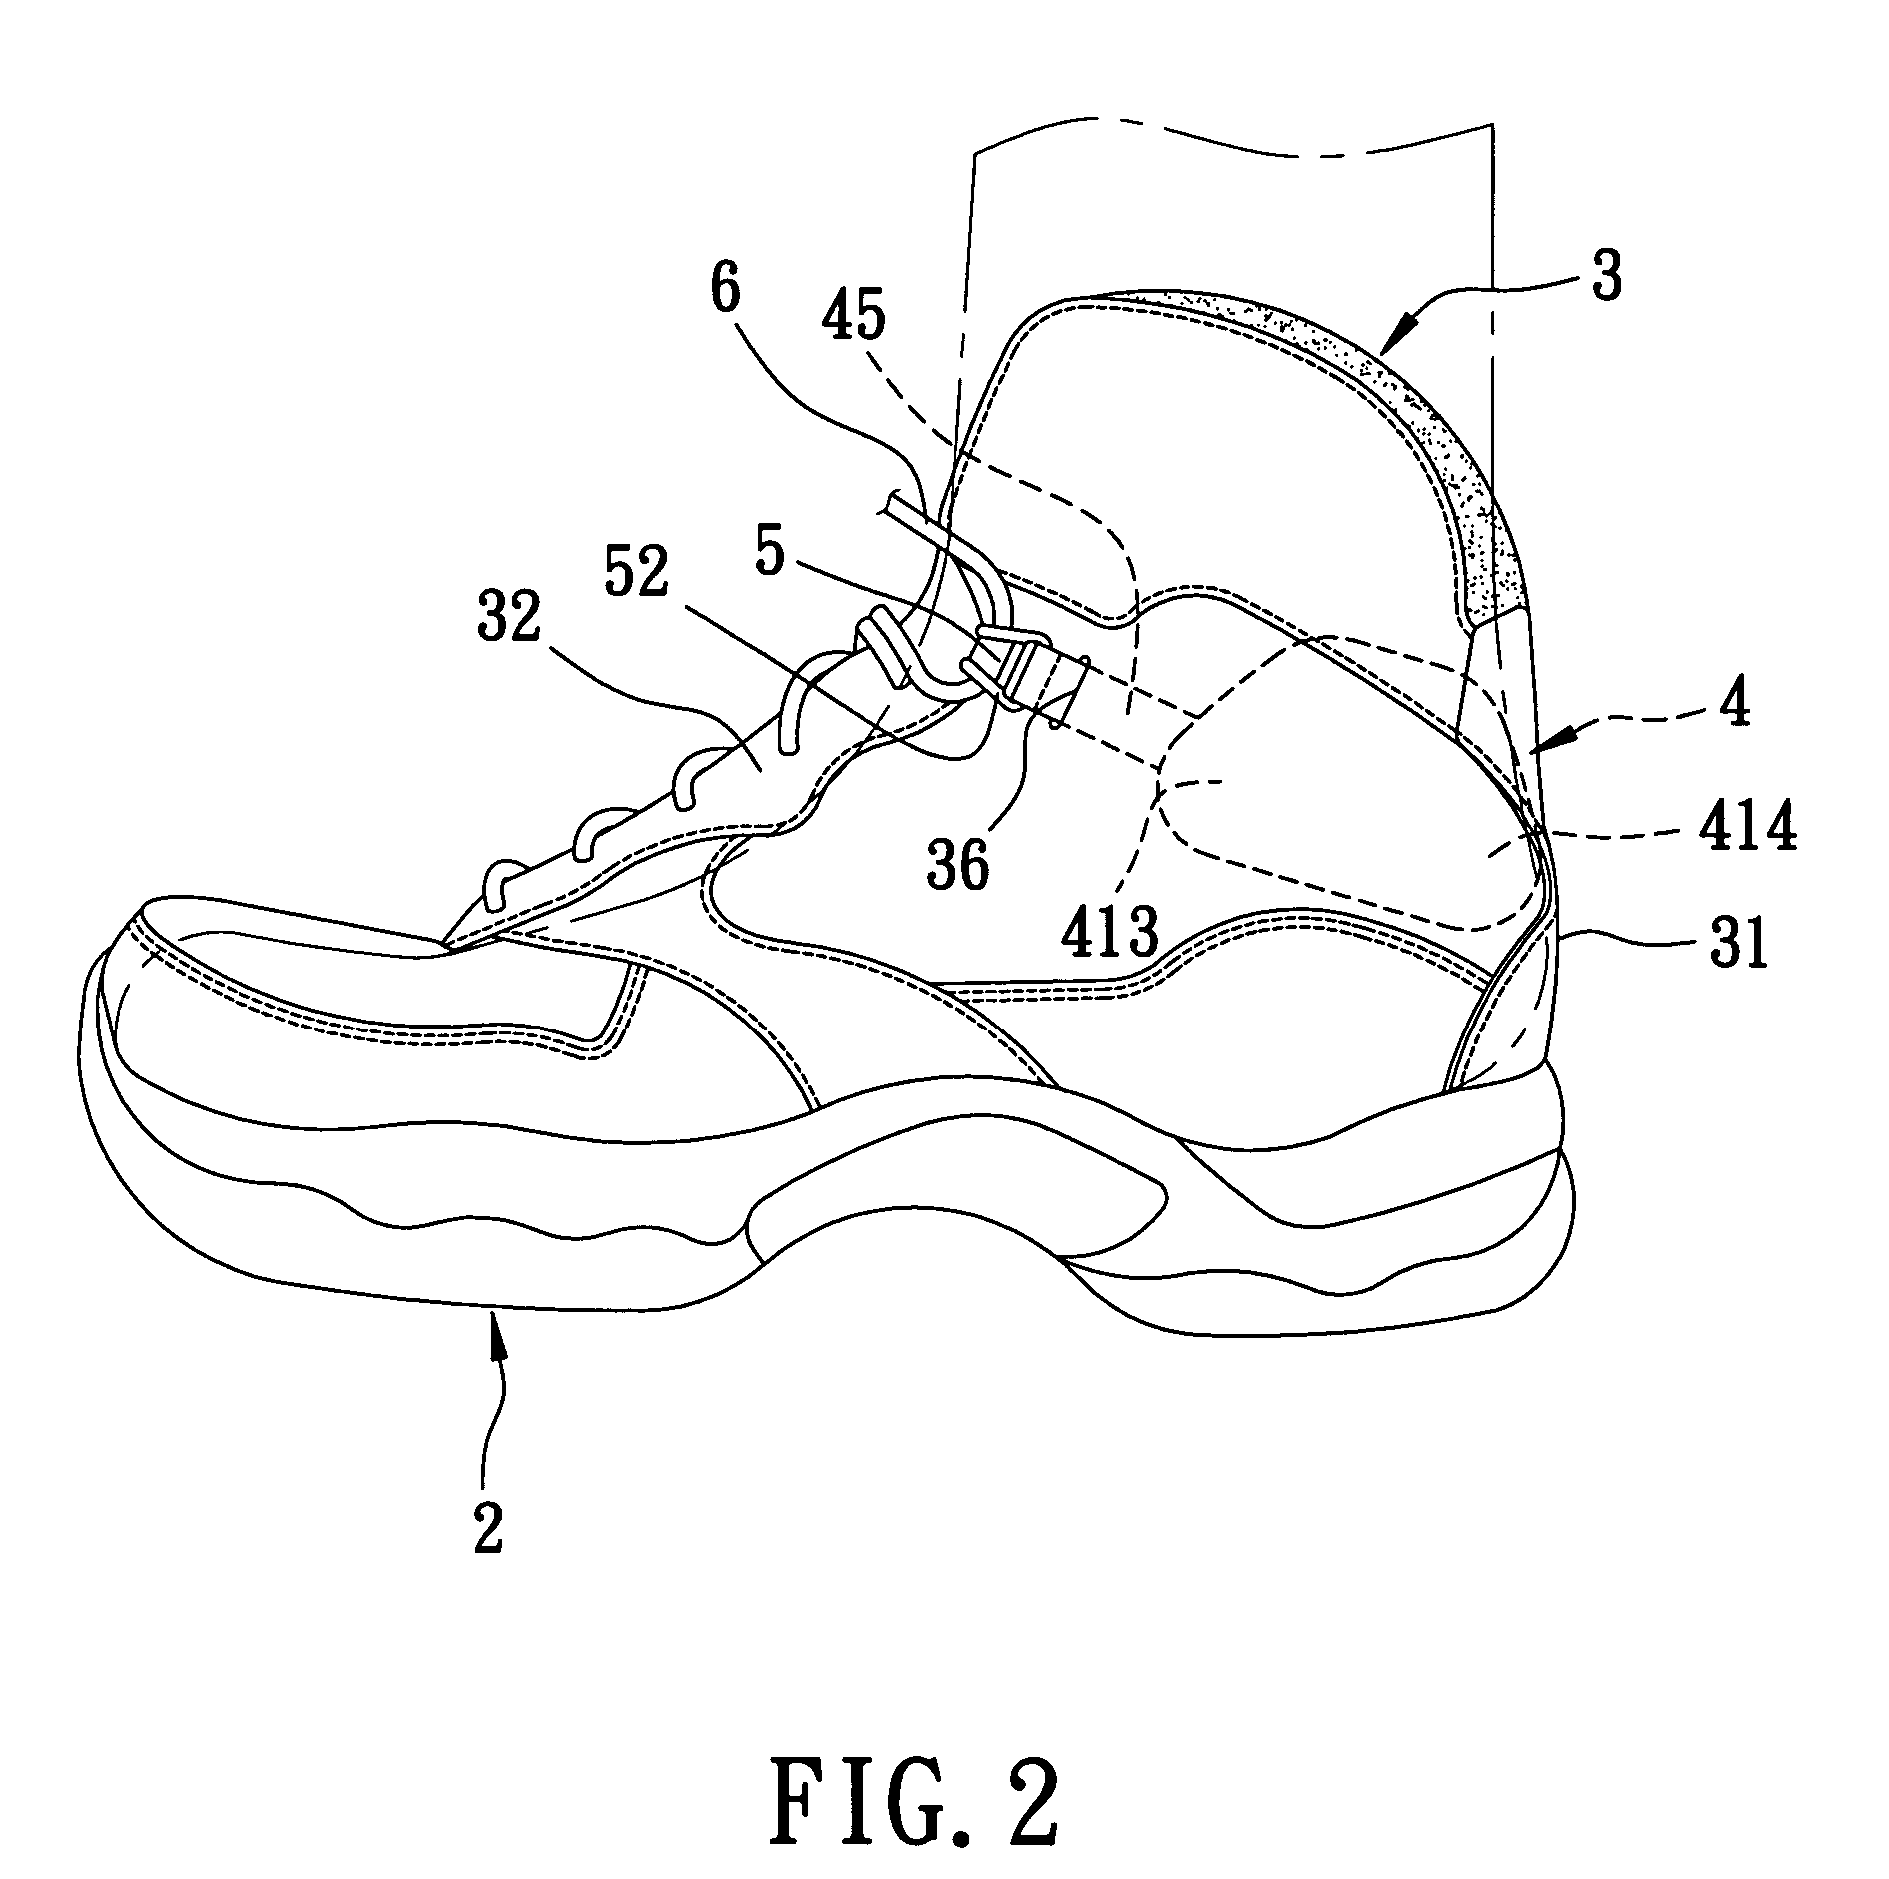 Shoe with adjustable fitting